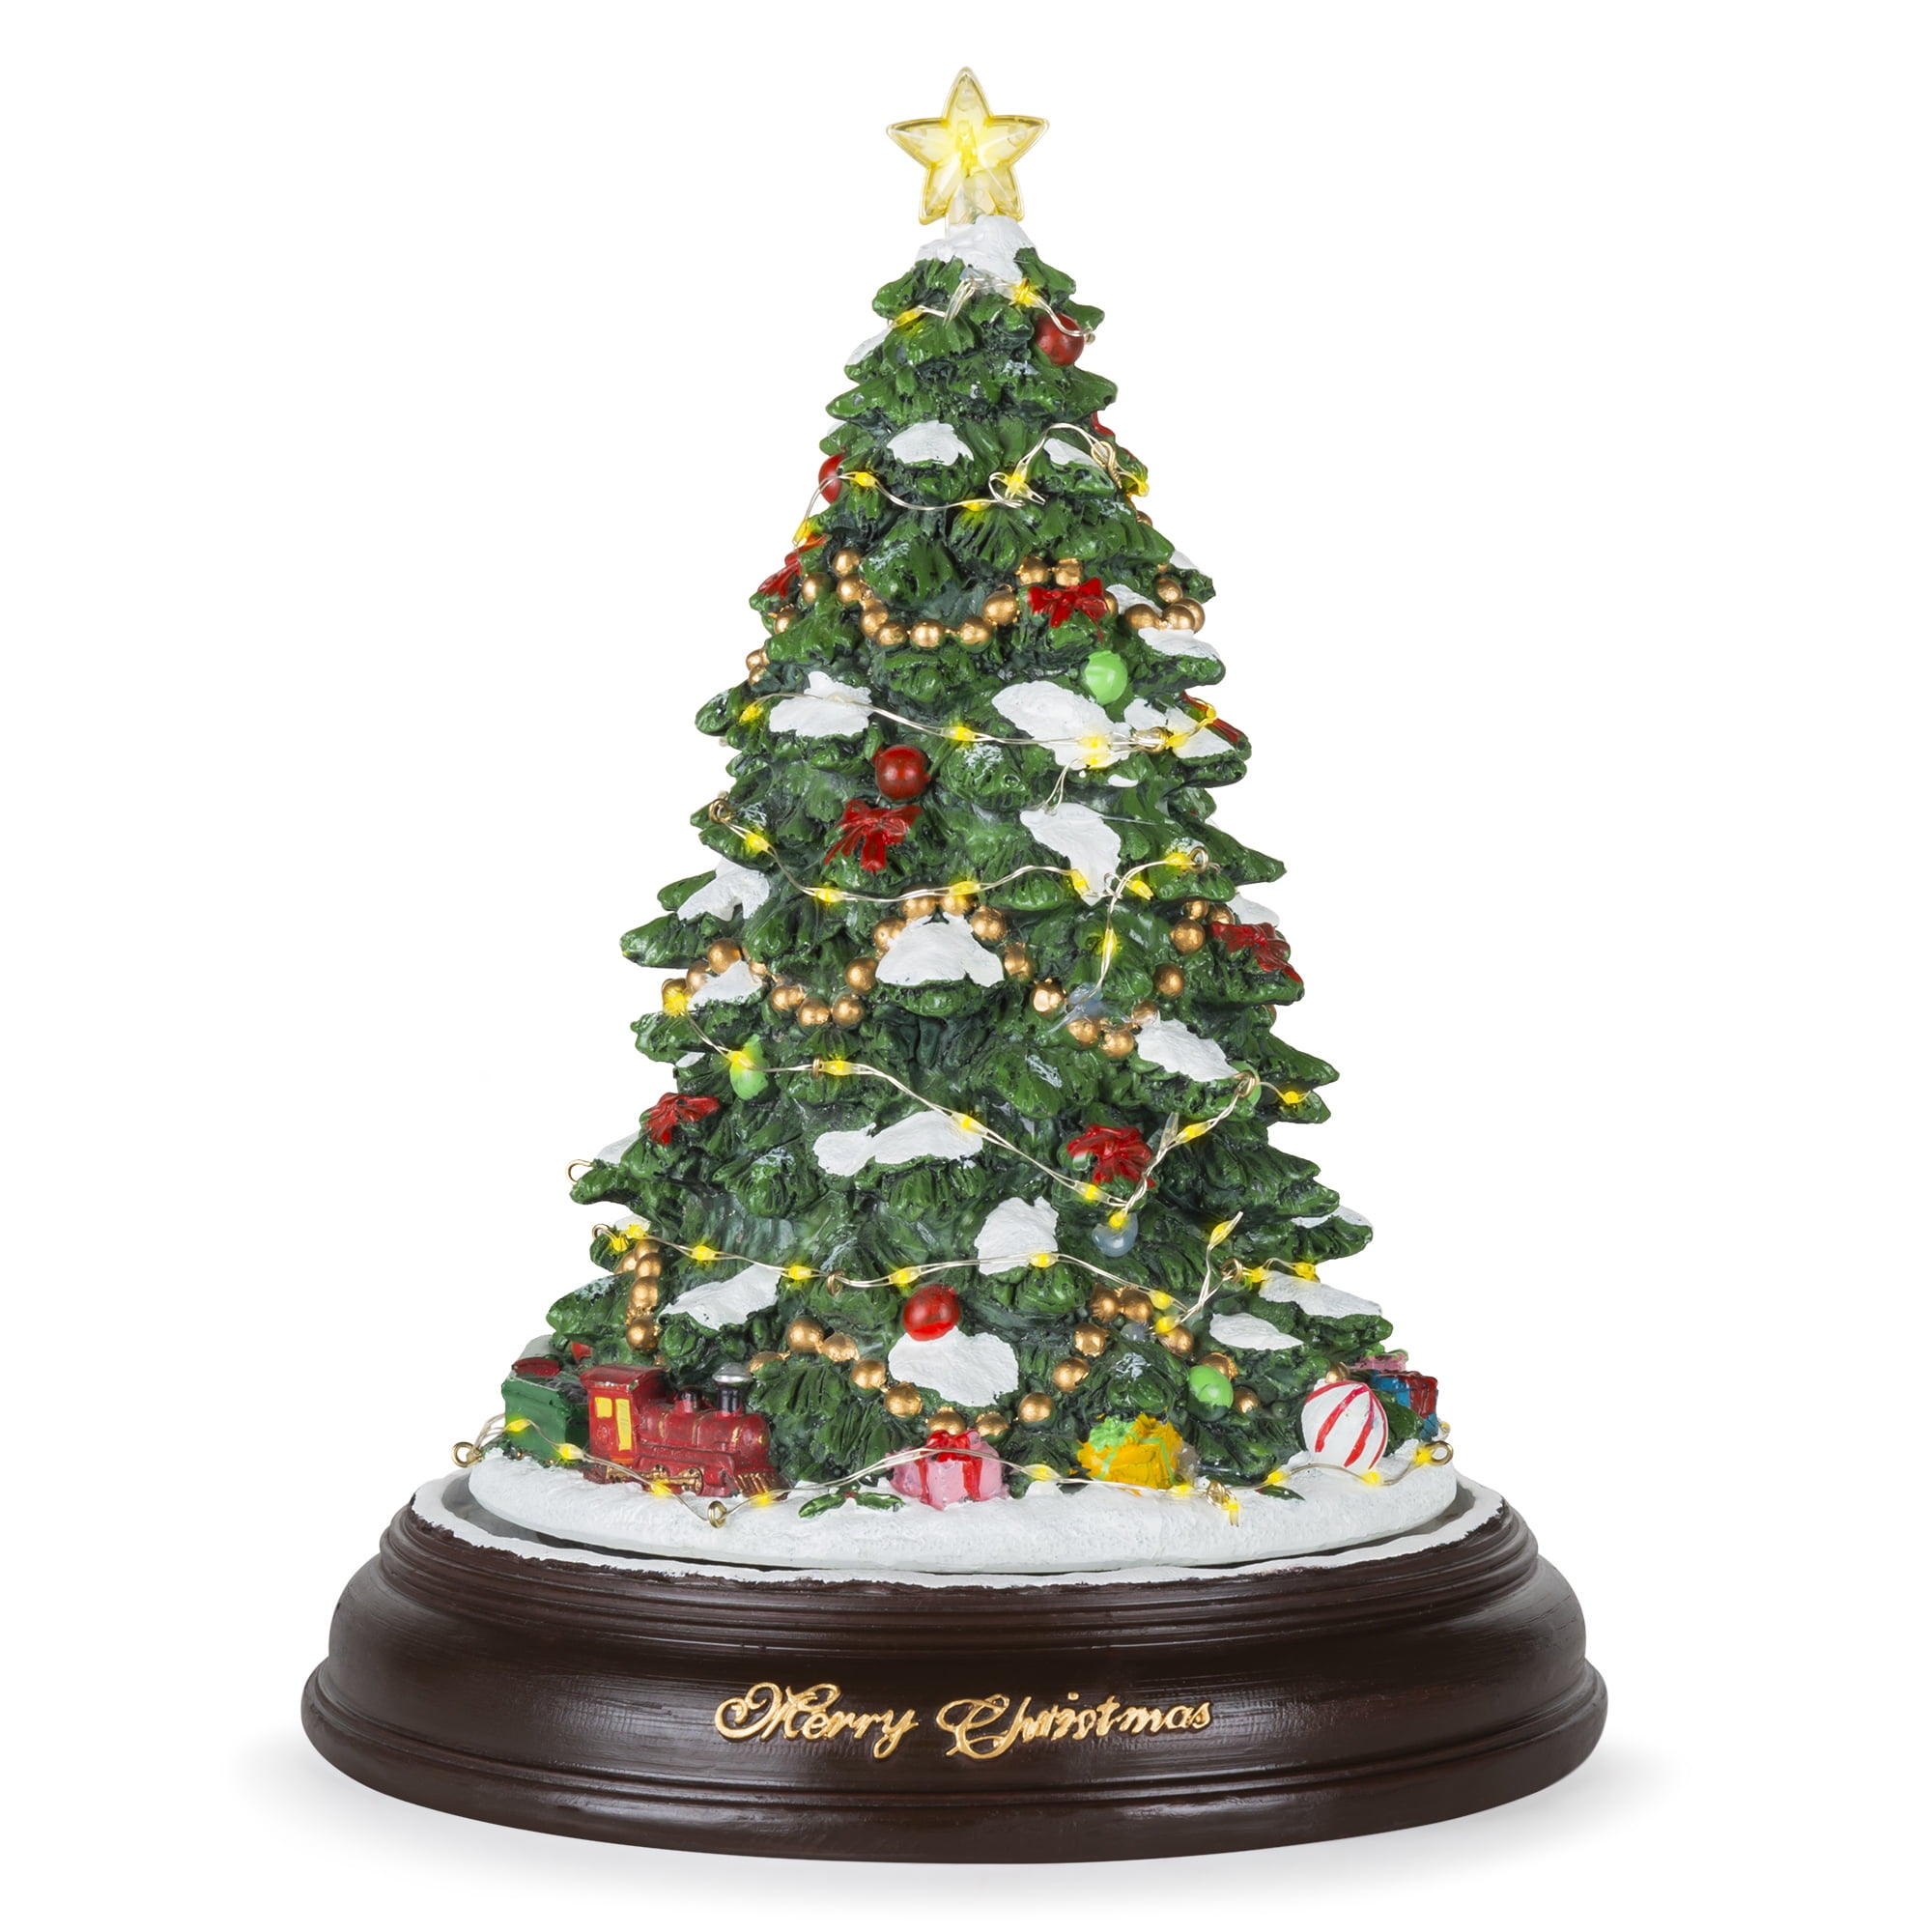 Musical Lights For Christmas Tree : The Holiday Aisle 6 3 Snowing Musical Black Artificial Christmas Tree With 80 Clear White Lights Reviews Wayfair / A musical light show with mega tree and other special effects.